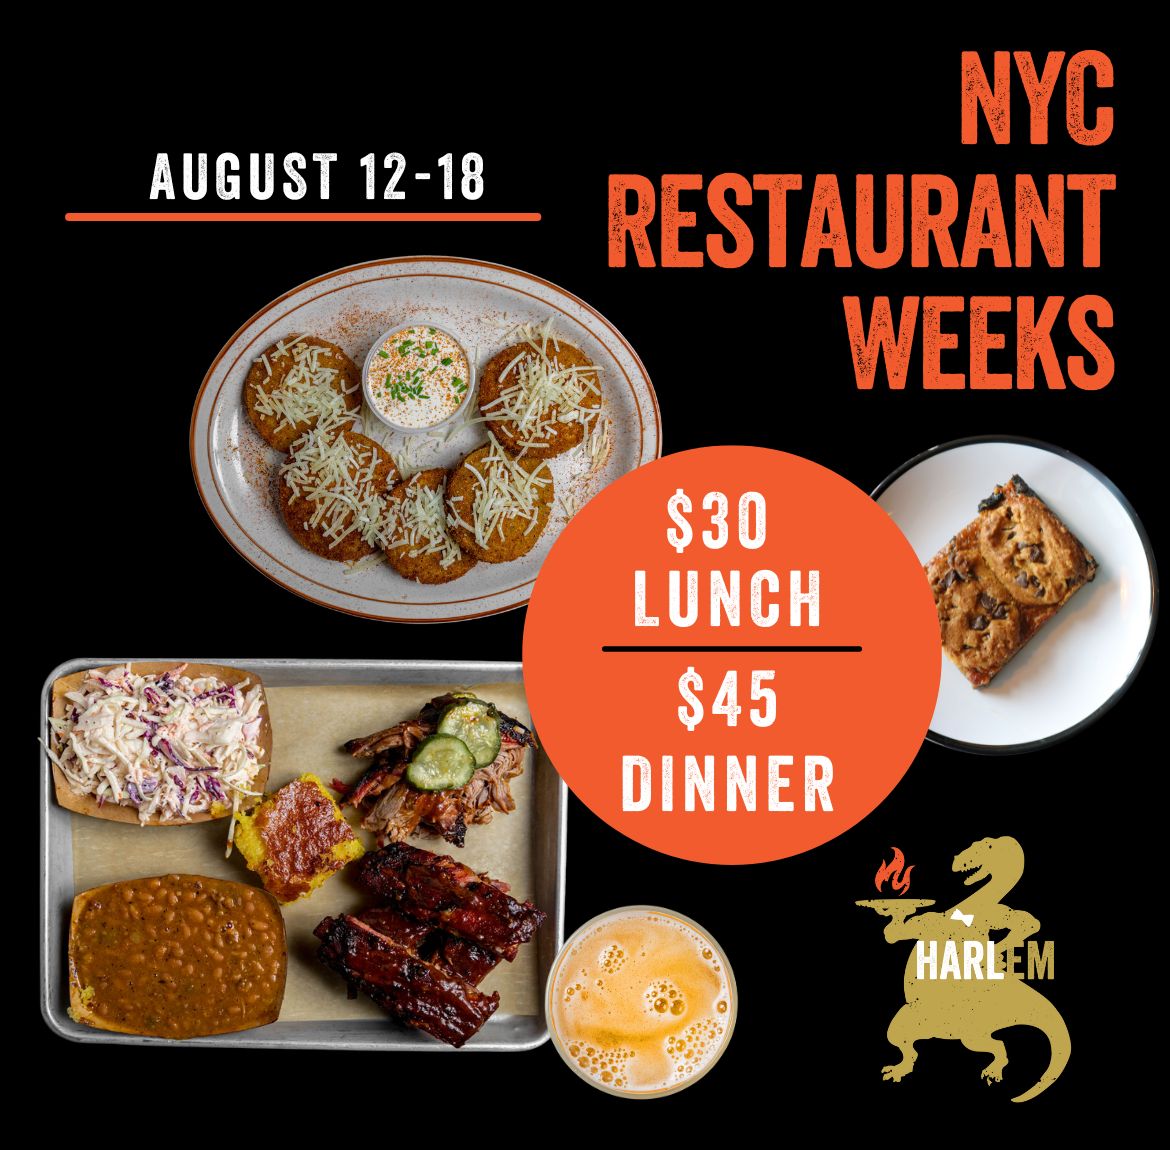 NYC Restaurant Weeks August 12th to August 18th. $30 Lunch & $45 dinner